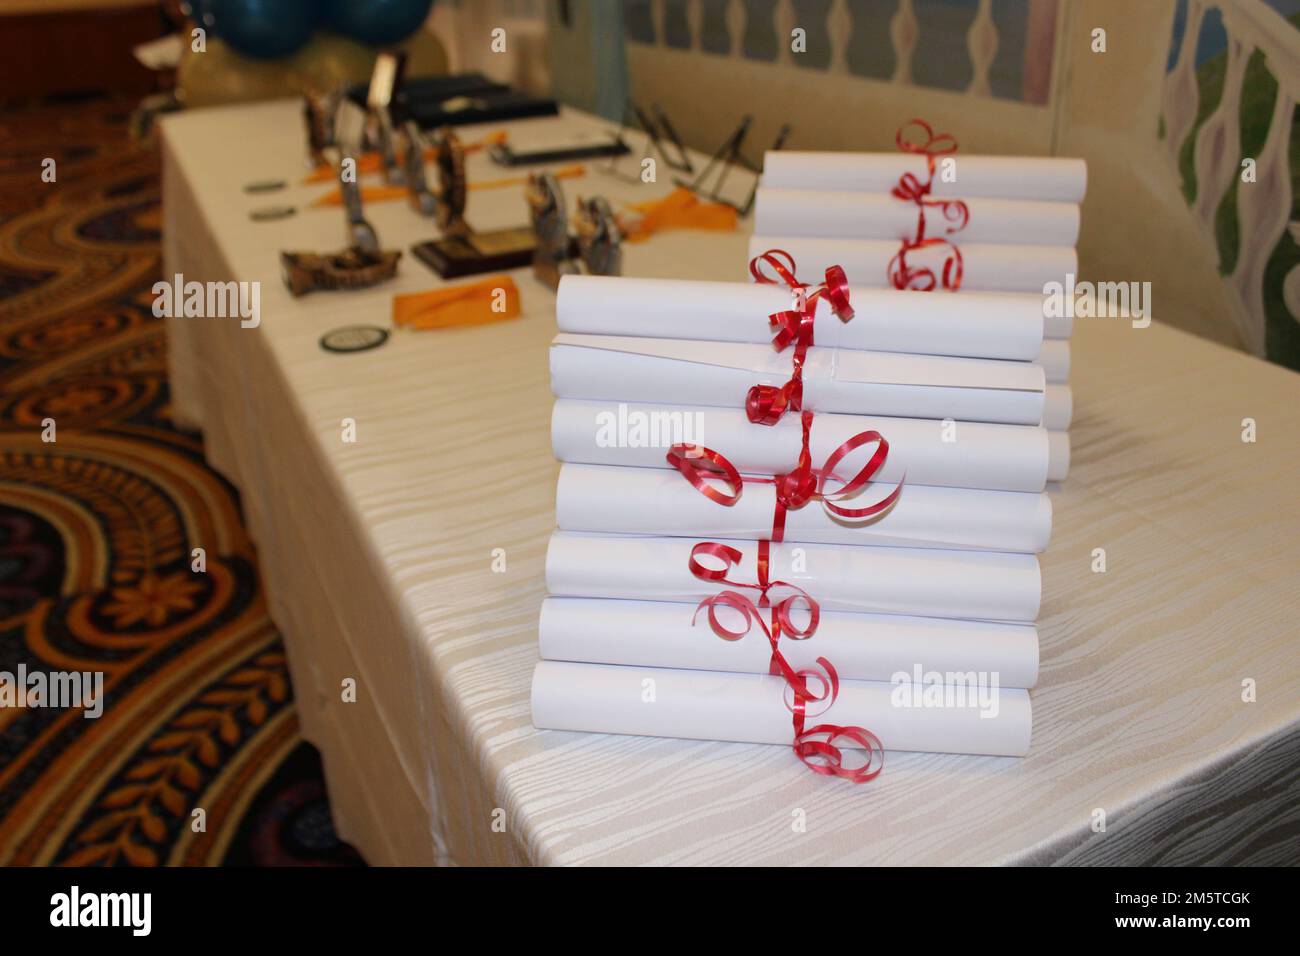 Diplomas rolled up neatly on a table Stock Photo